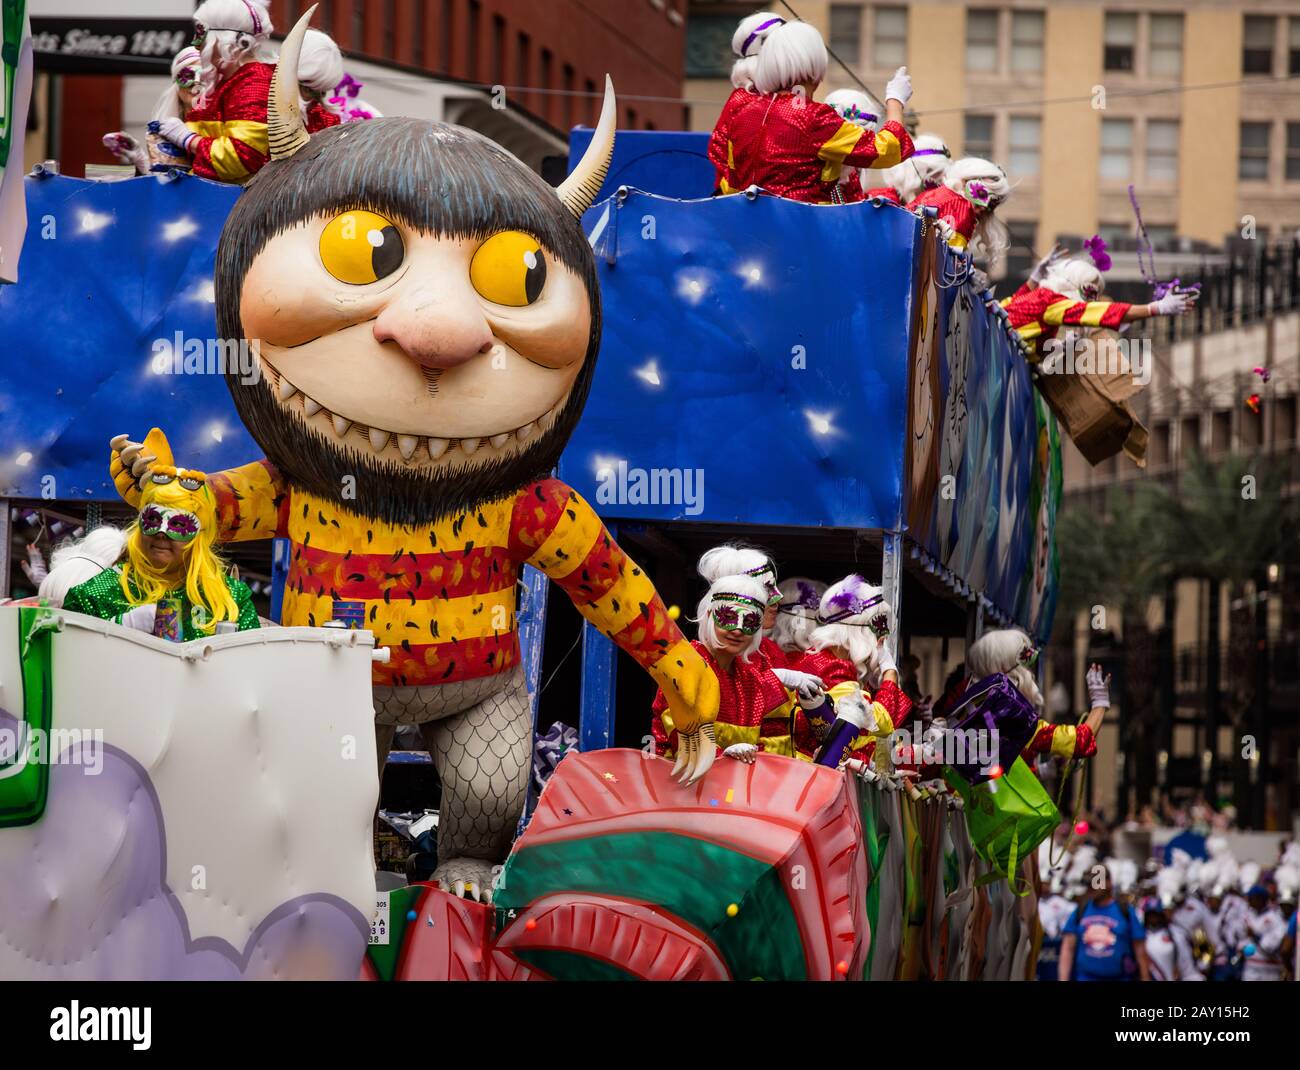 Where the Wild Things Are Float, presented by Krewe Iris, Mardis Gras 2019. New Orleans, Lousiana Stock Photo